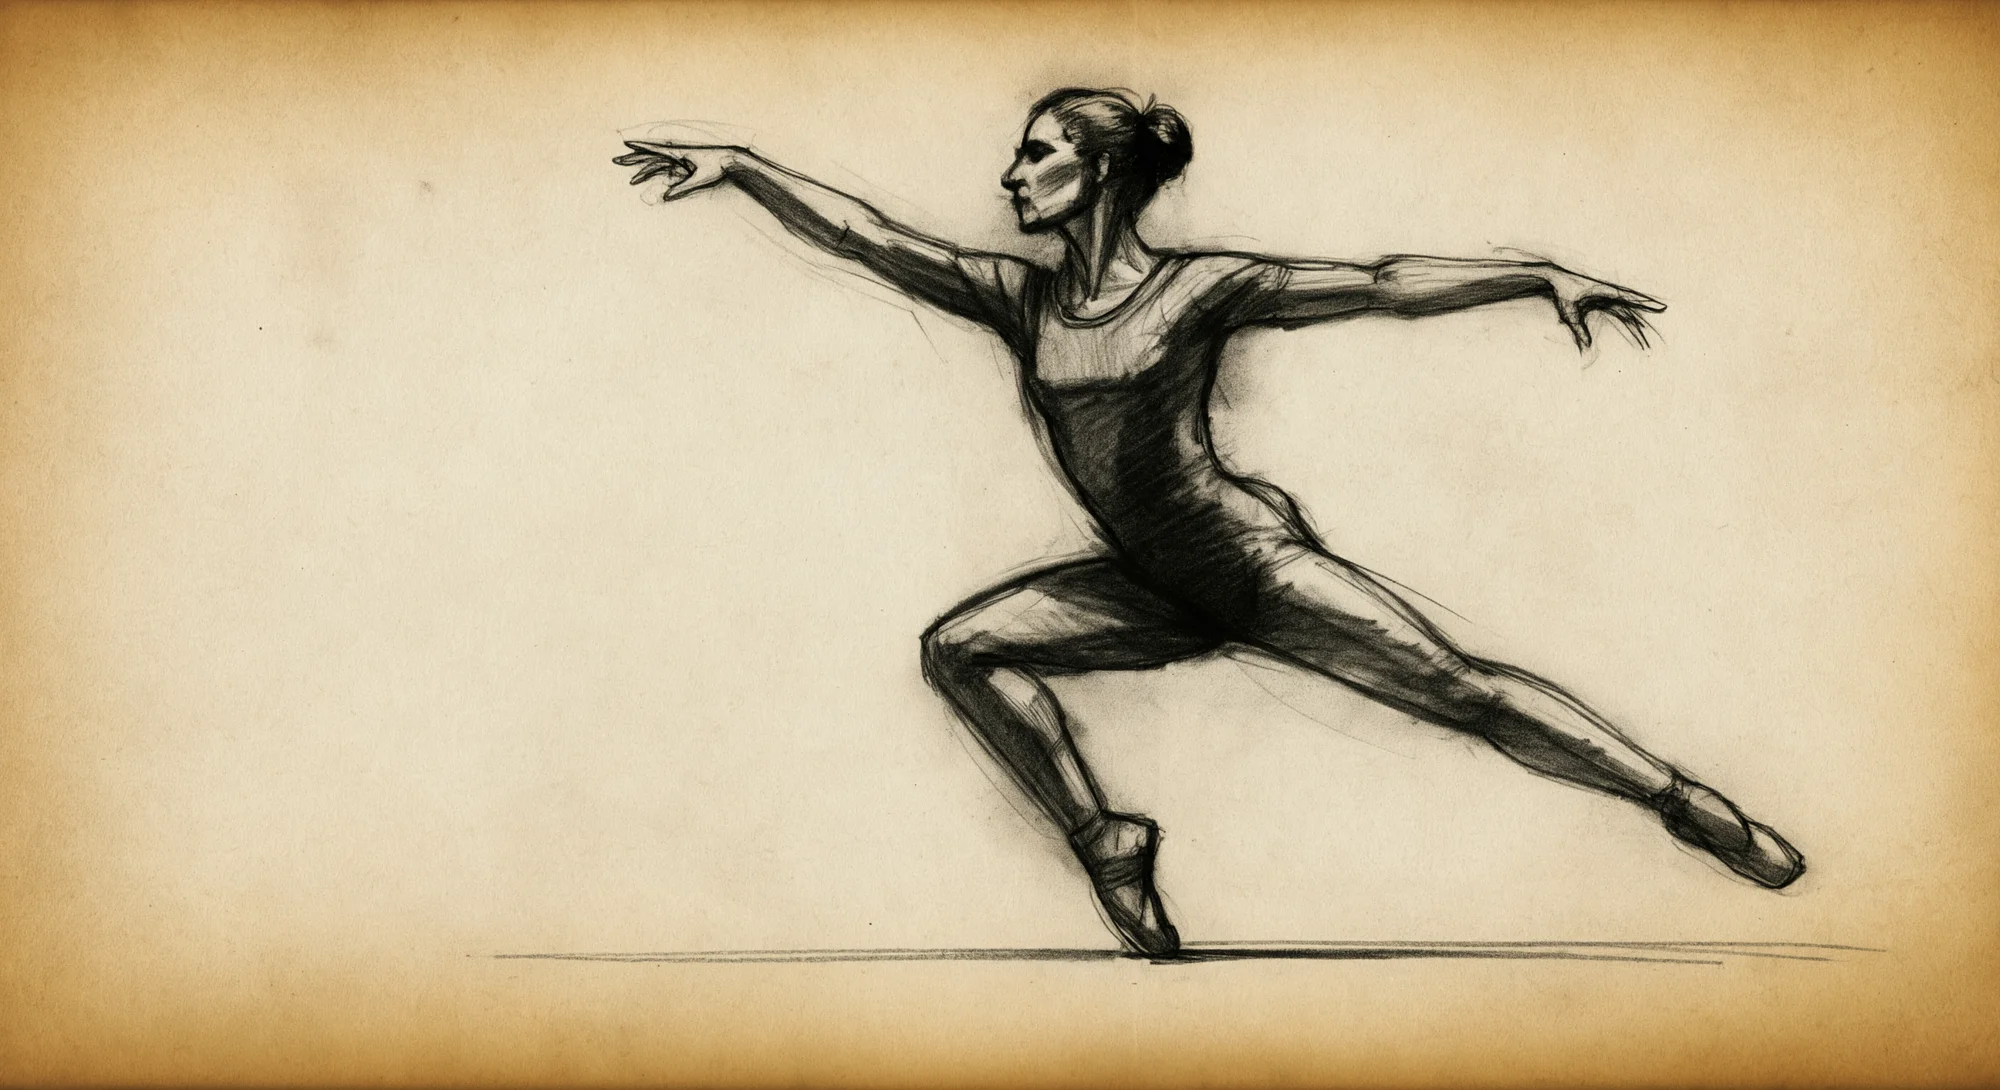 A charcoal sketch of a female dancer capturing her in the middle of a dynamic movement. The sketch is rendered on aged parchment paper.